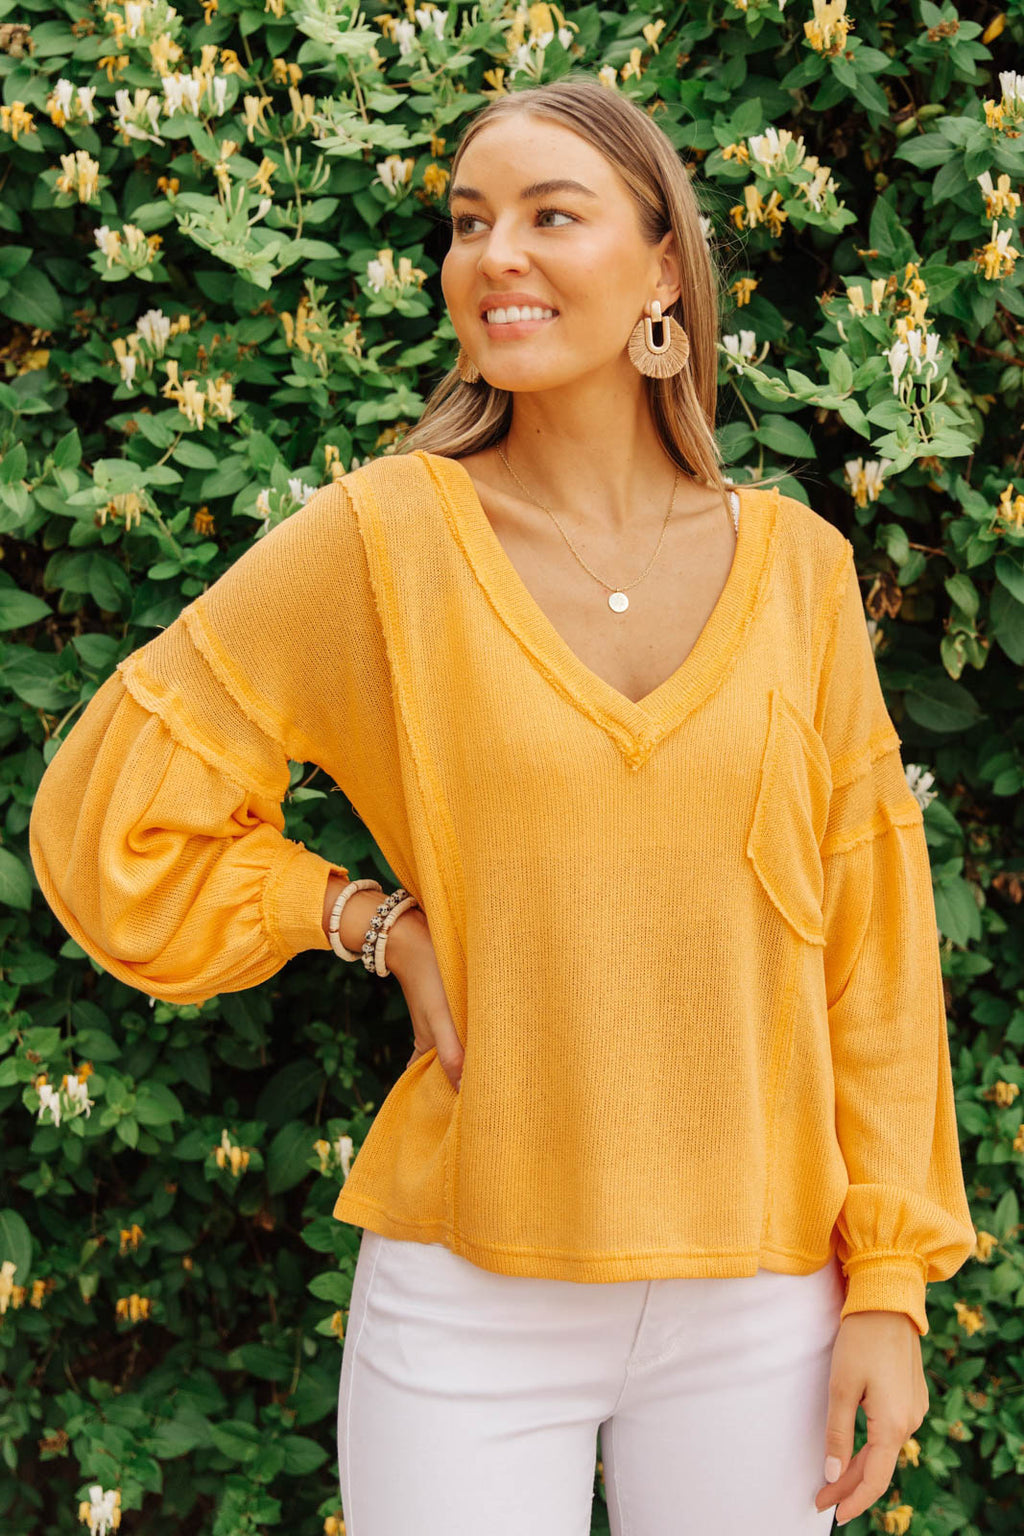 7 of the Best Peplum Tops (2021) Cottagecore Inspired!